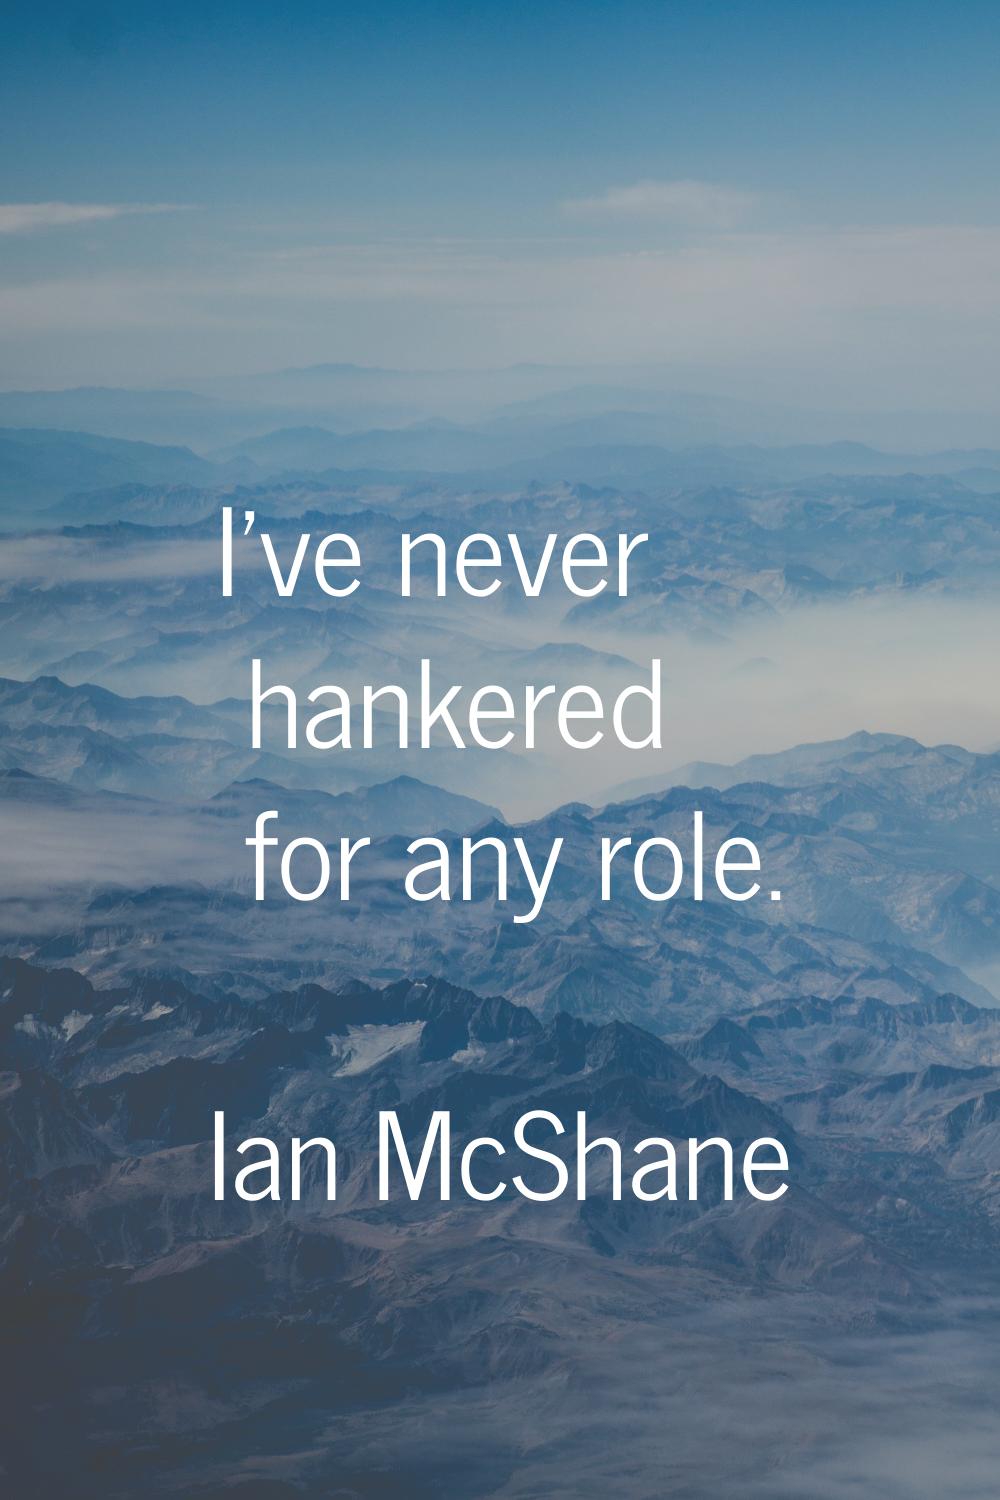 I've never hankered for any role.